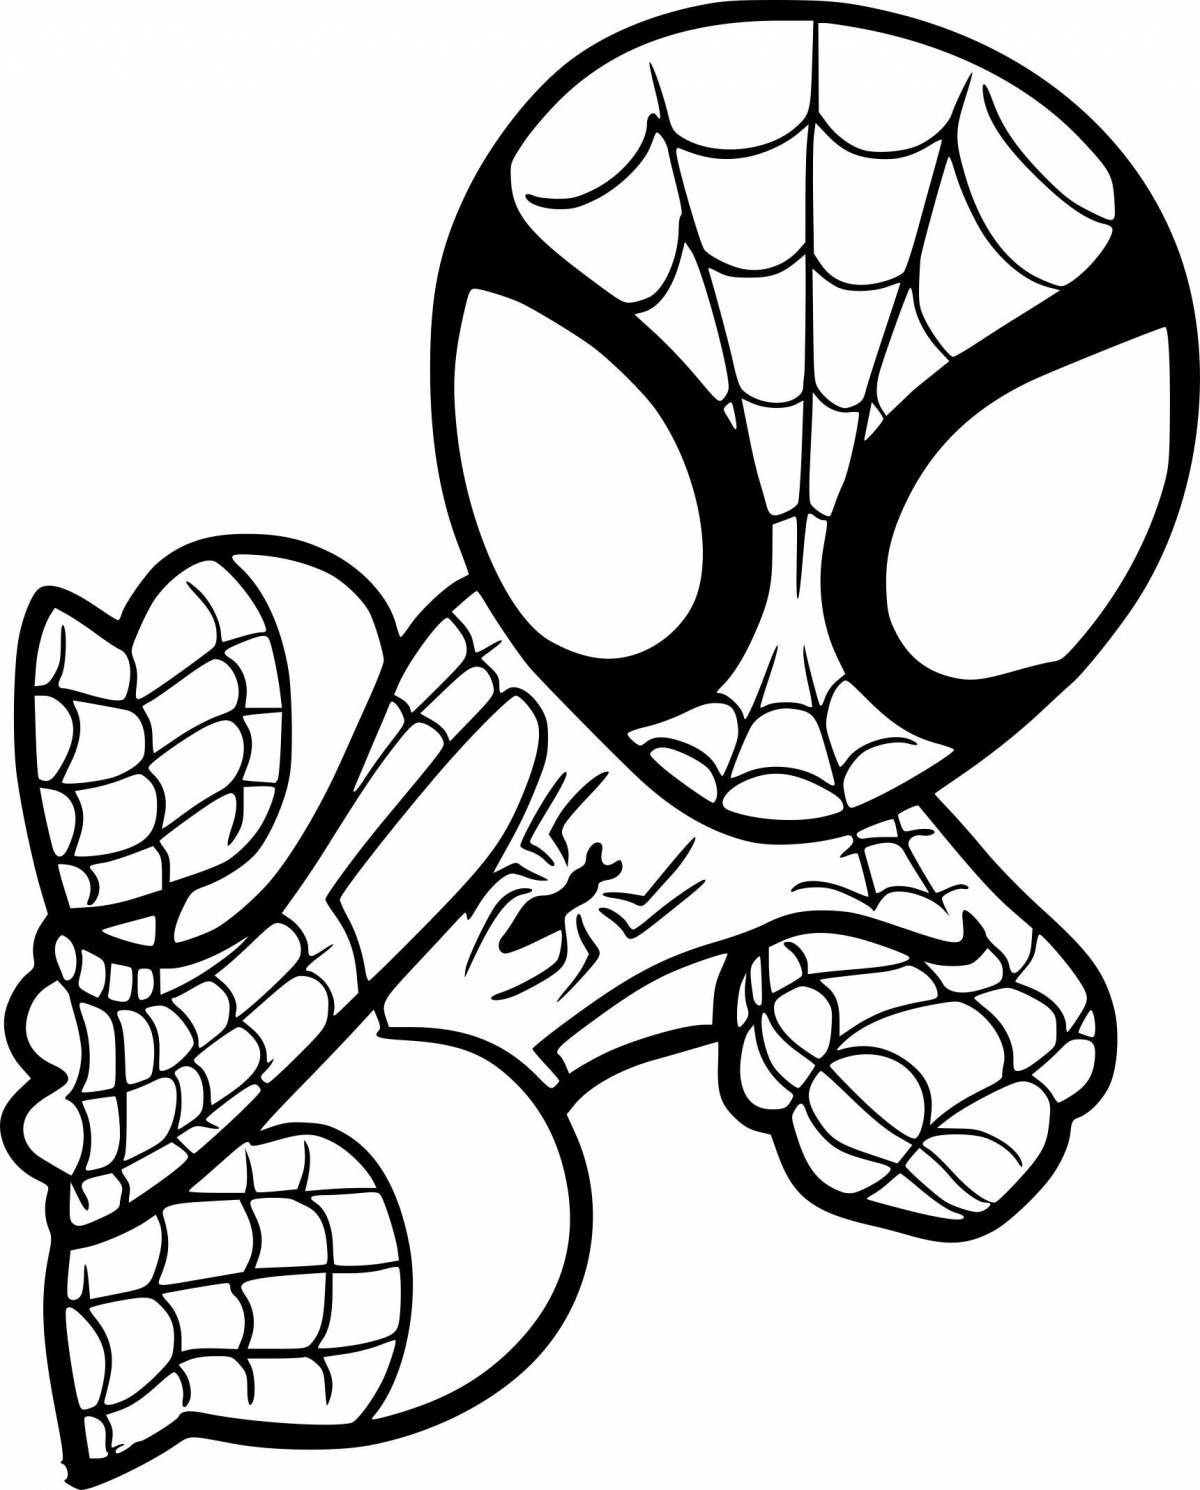 Outstanding spiderman coloring page for boys